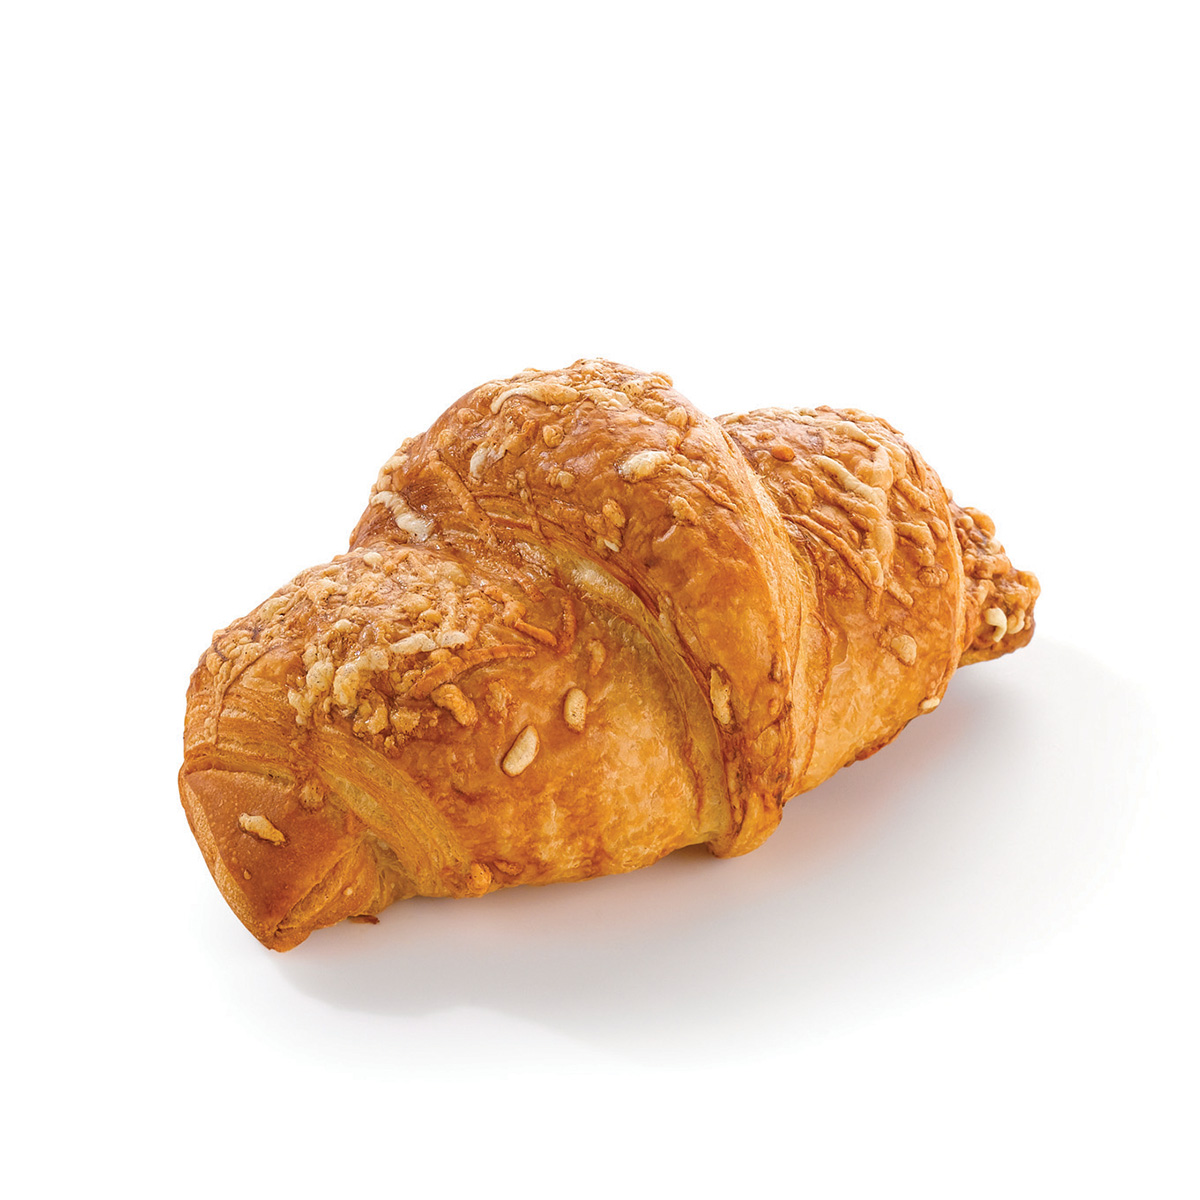 Molco Croissant ham-kaas, roomboter